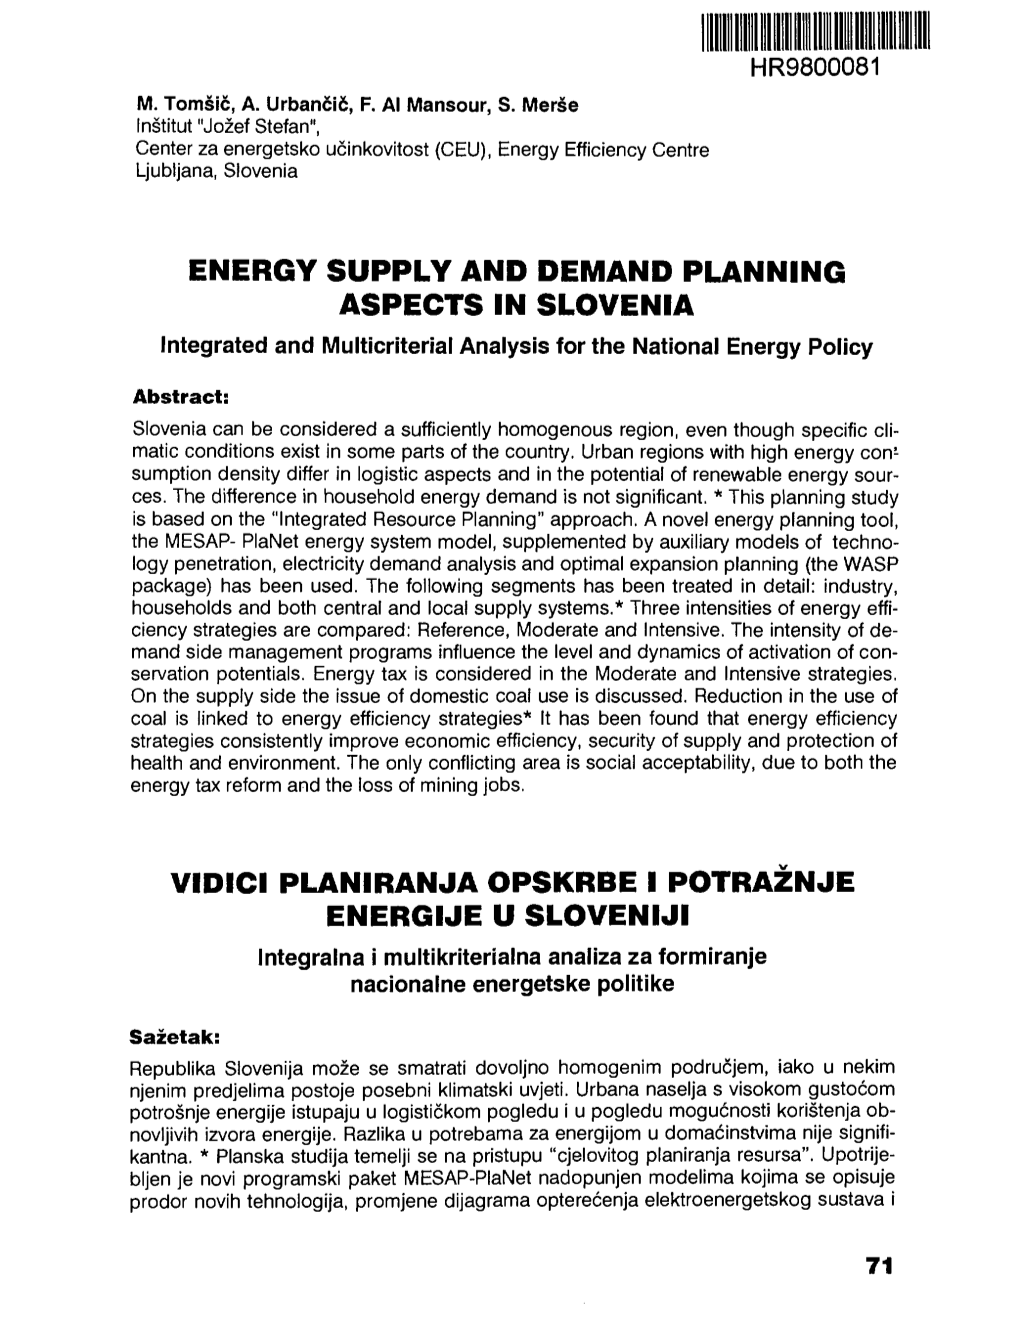 ENERGY SUPPLY and DEMAND PLANNING ASPECTS in SLOVENIA Integrated and Multicriterial Analysis for the National Energy Policy